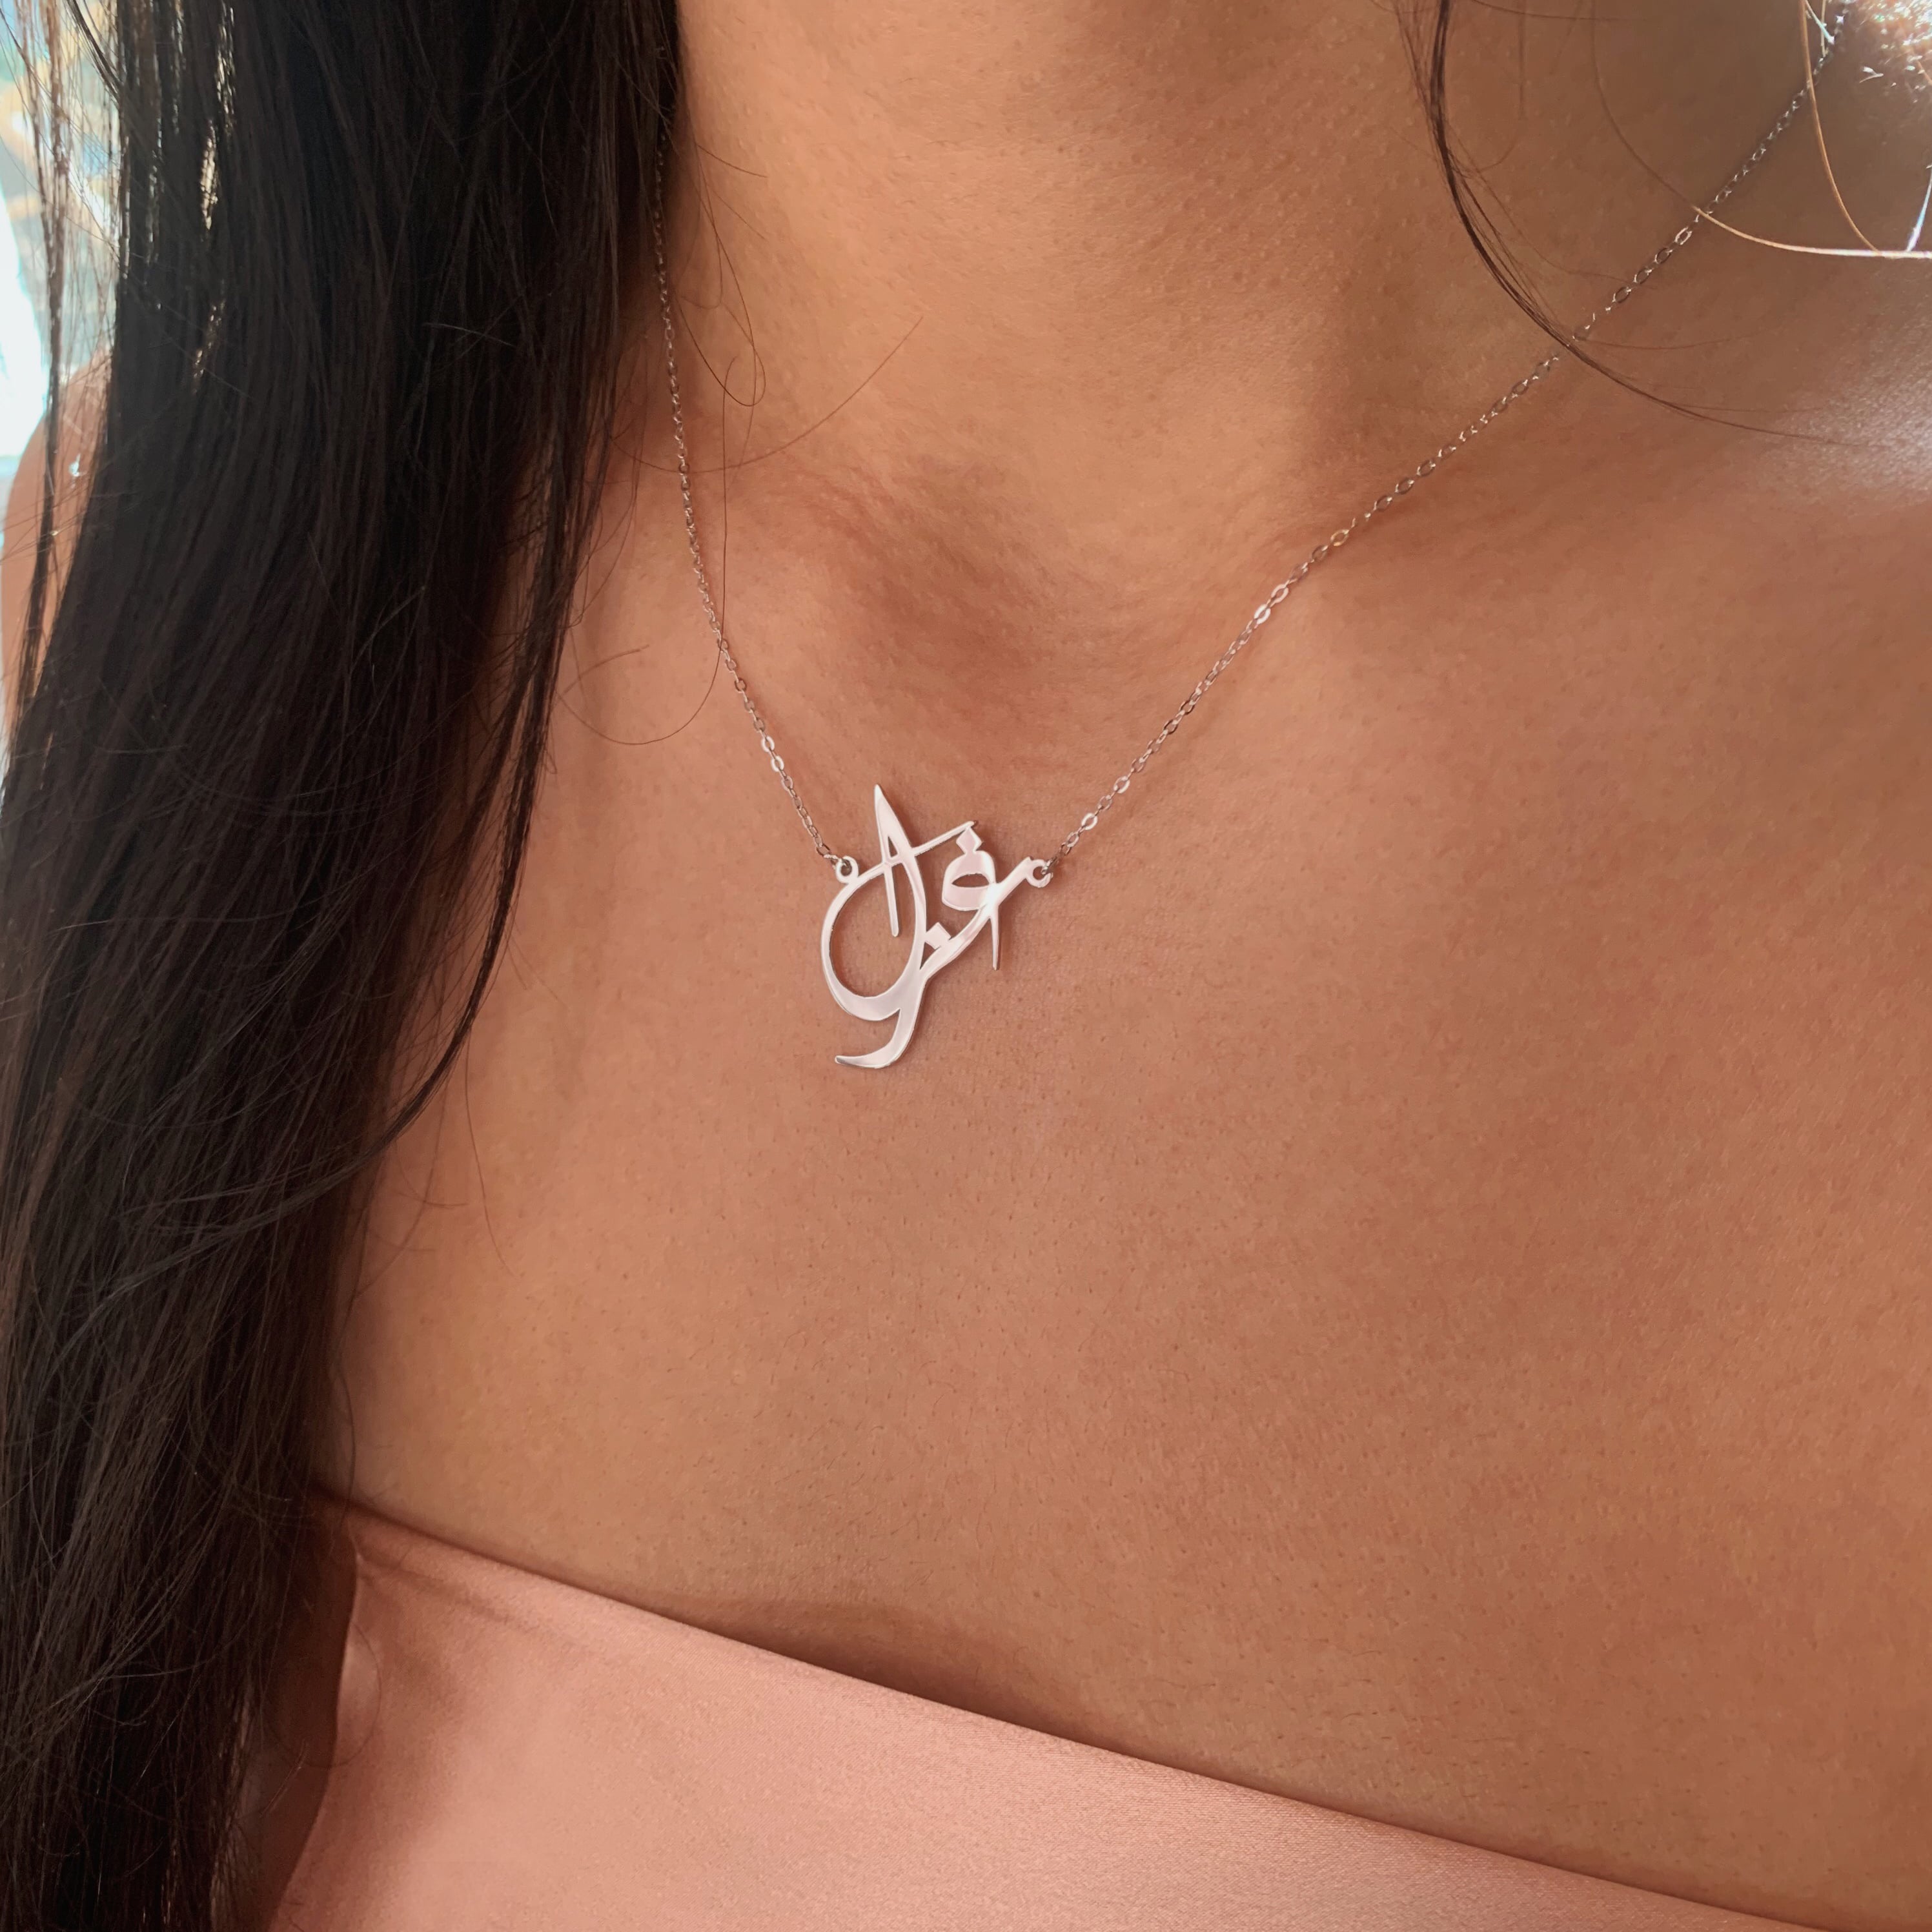 SCRIPT Calligraphy Persian/Arabic Nameplate Necklace